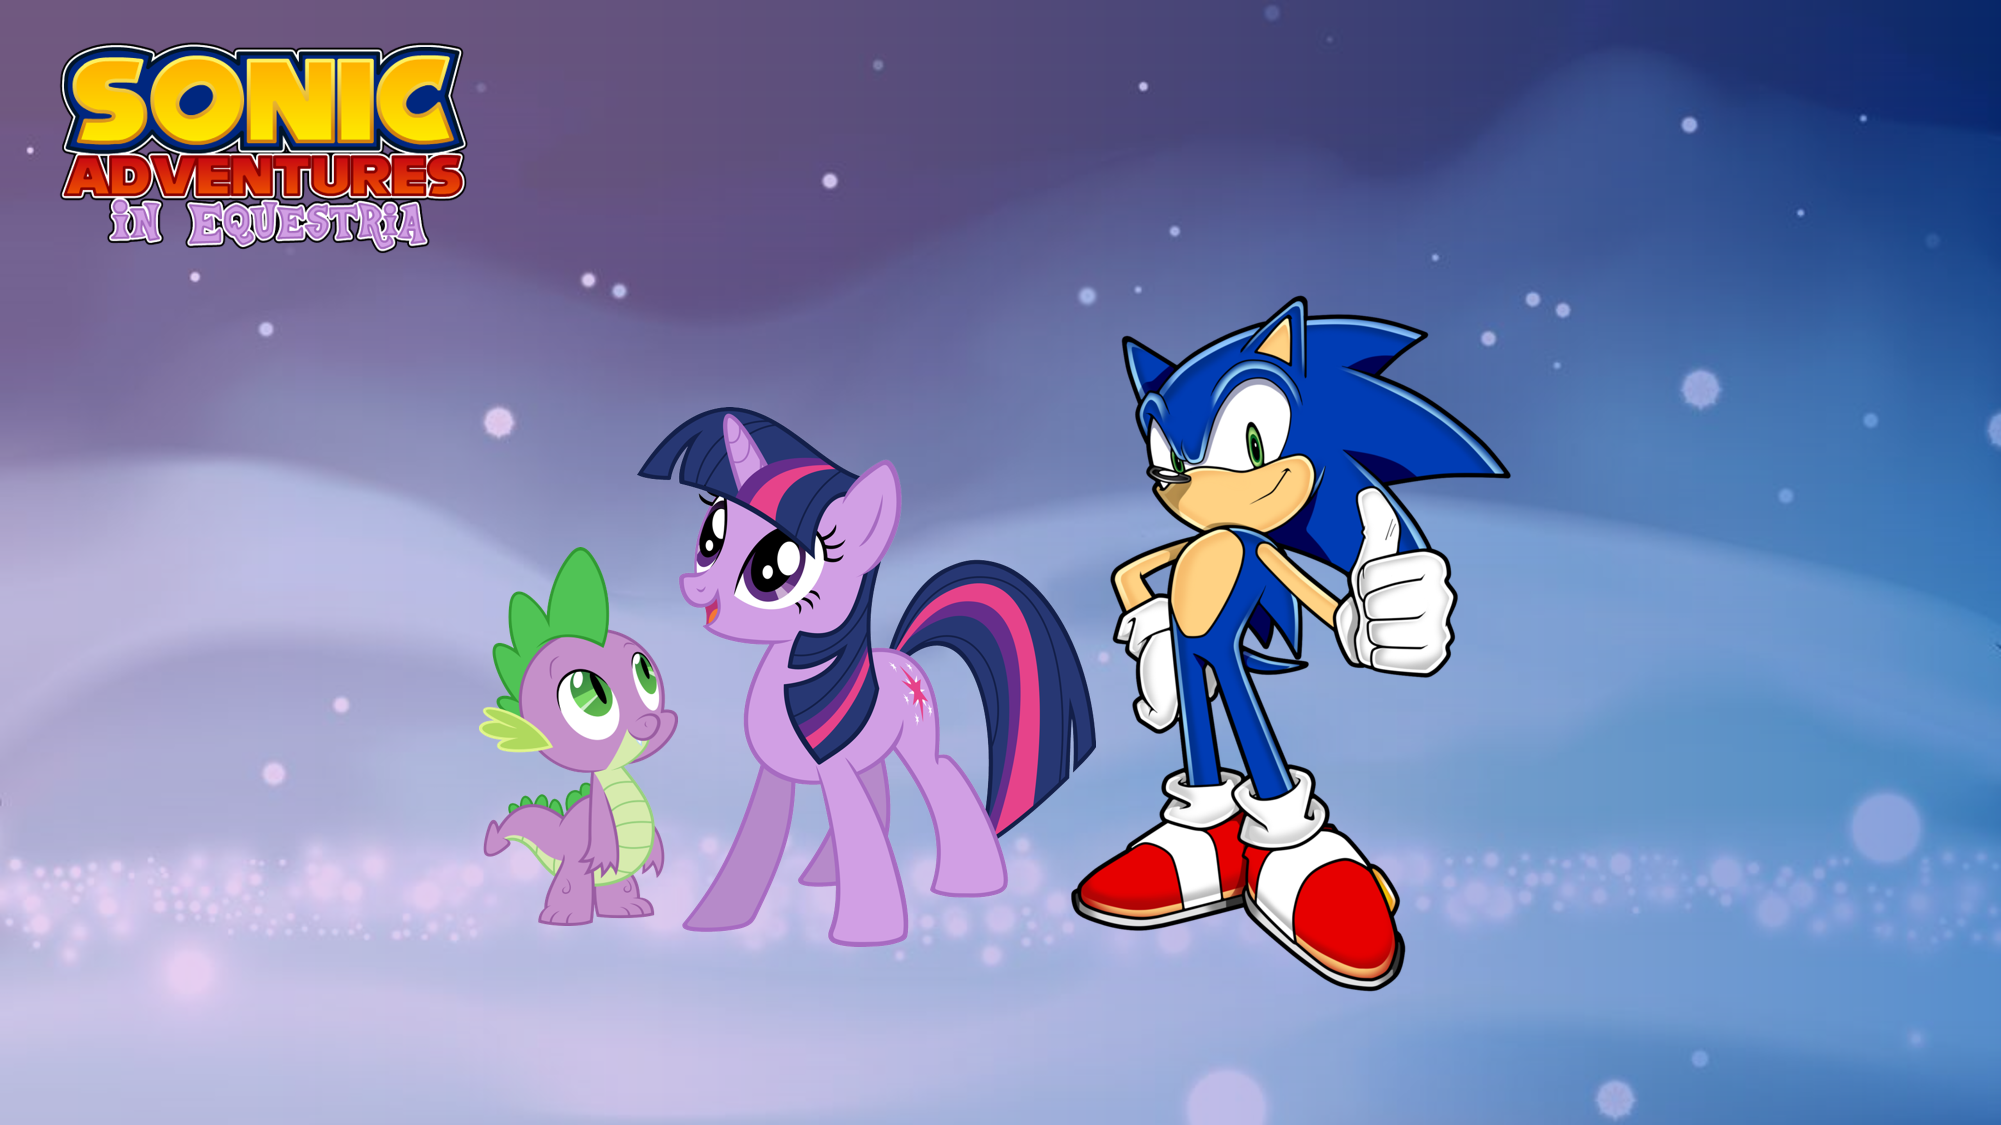 https://static.wikia.nocookie.net/poohadventures/images/2/26/Sonic_and_Twilight.png/revision/latest?cb=20190716150706